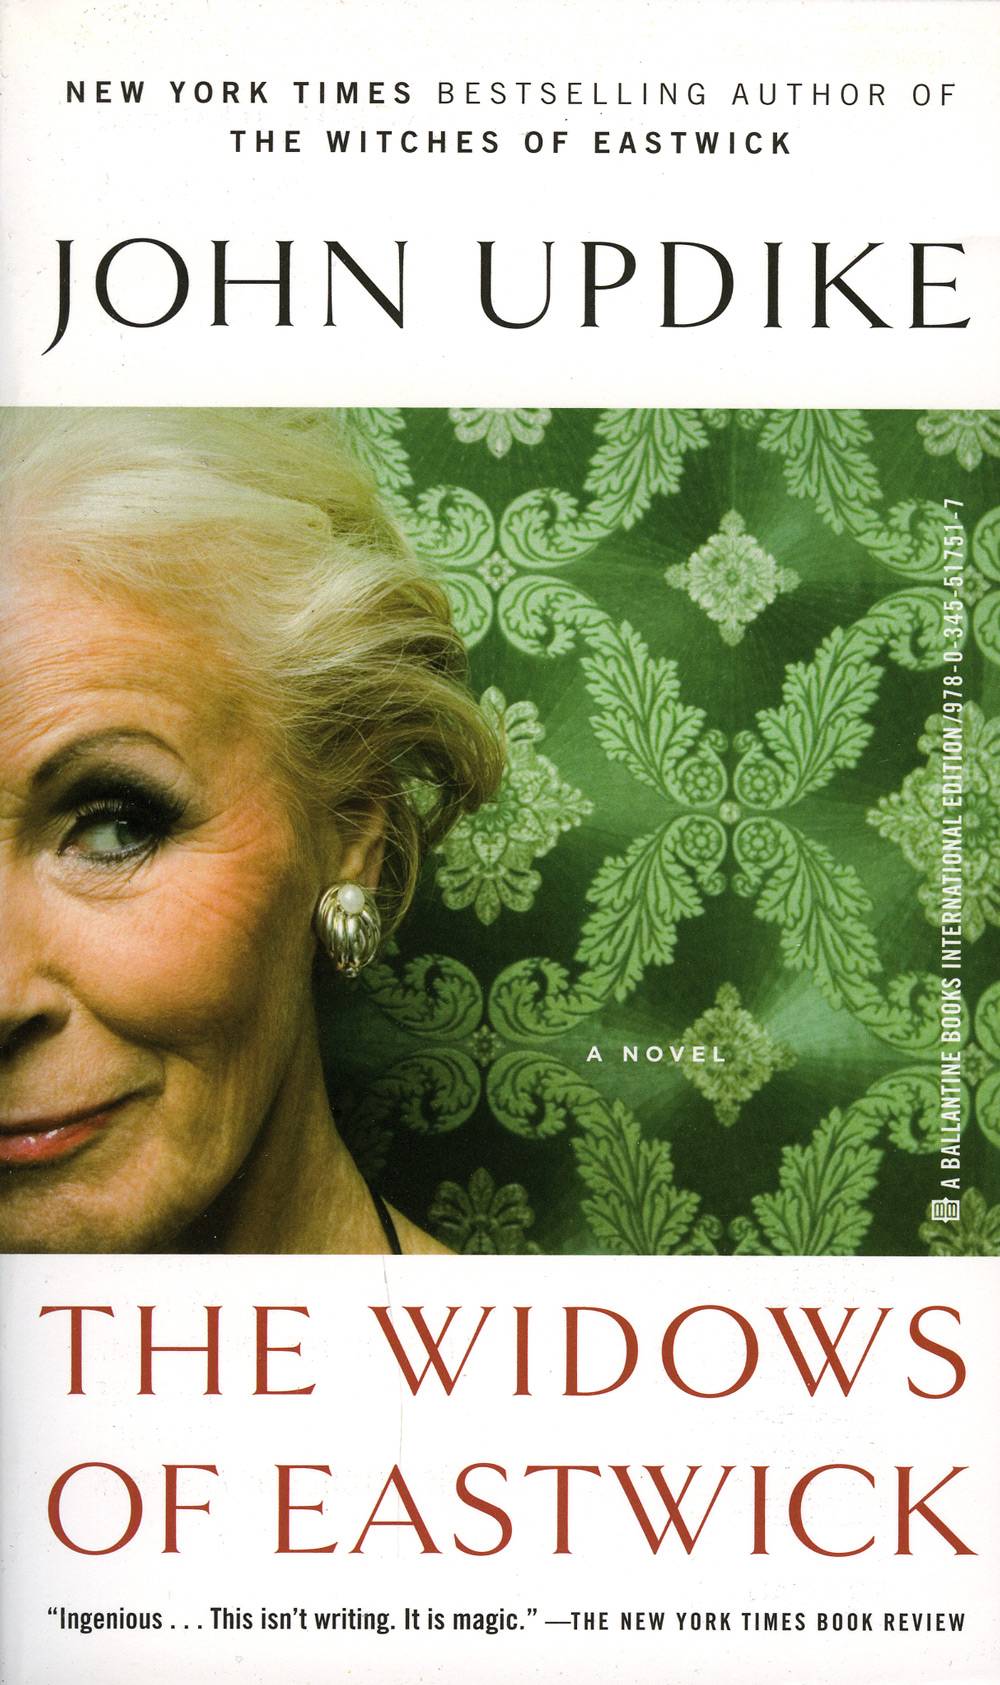 Widows of Eastwick (The)